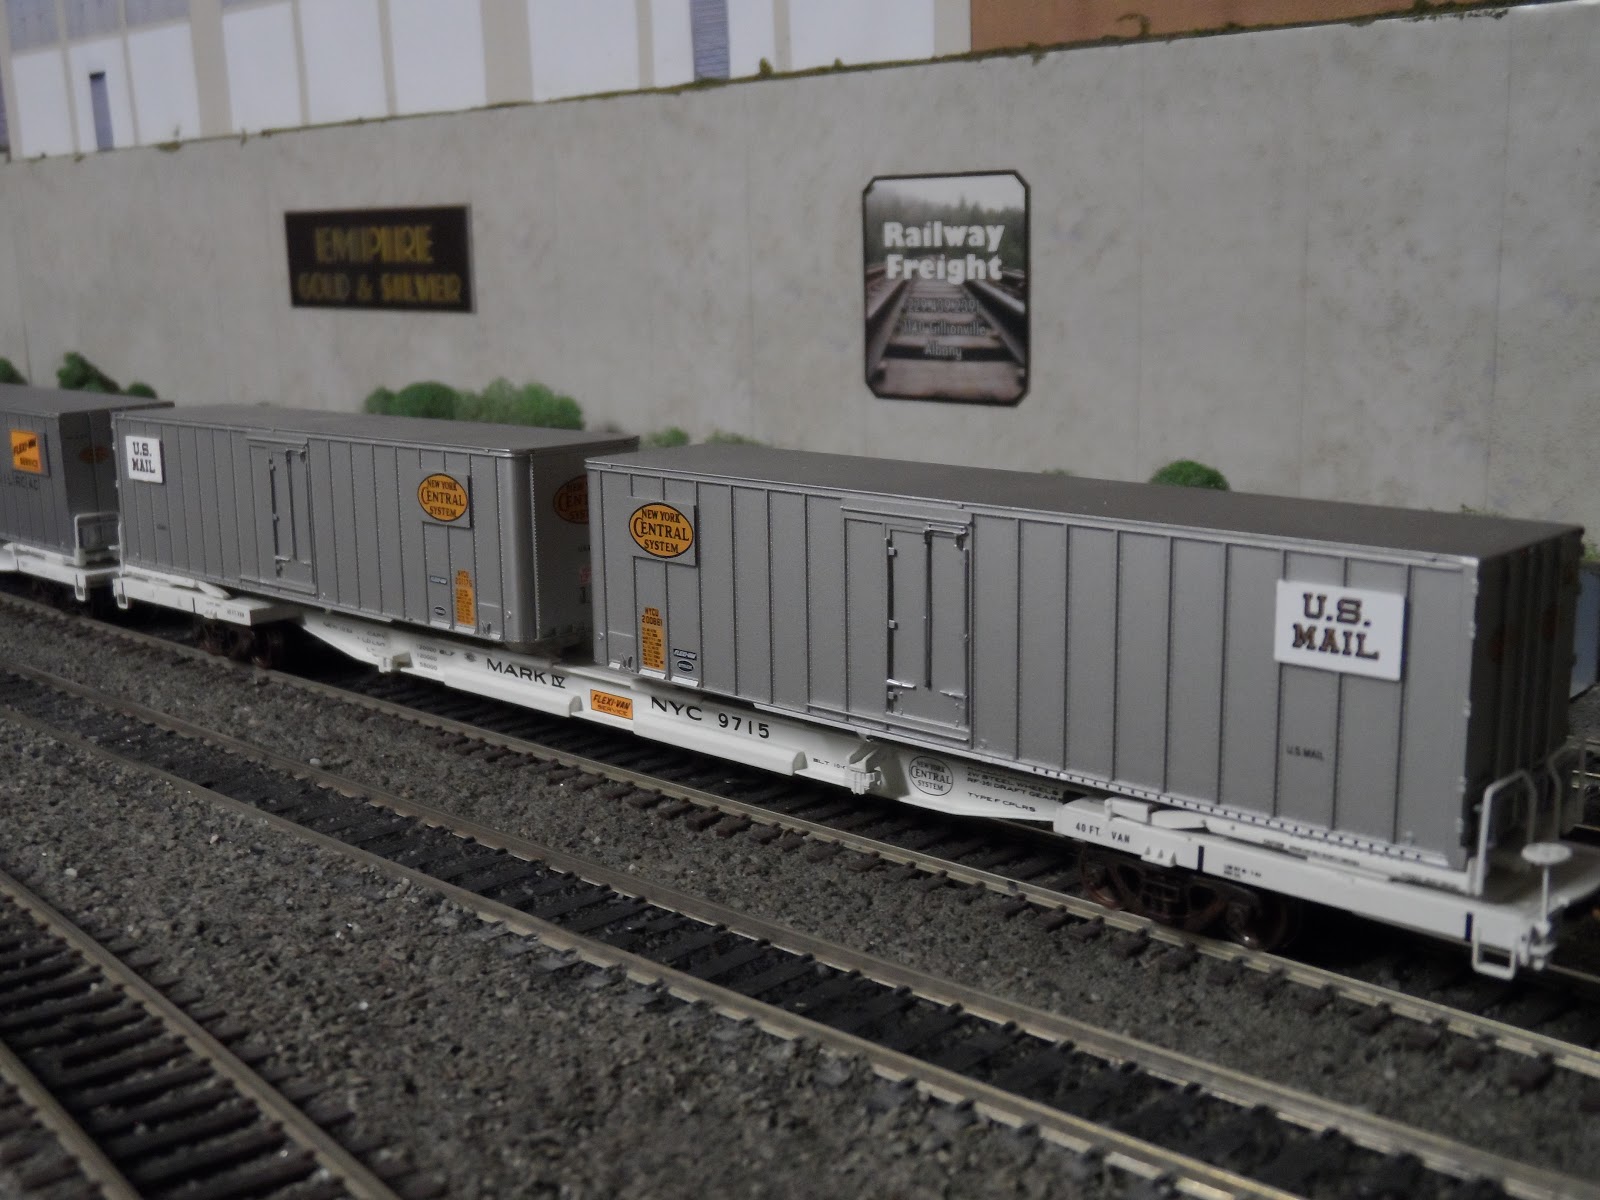 Piggyback (TOFC) and Doublestack (COFC) Train Cars